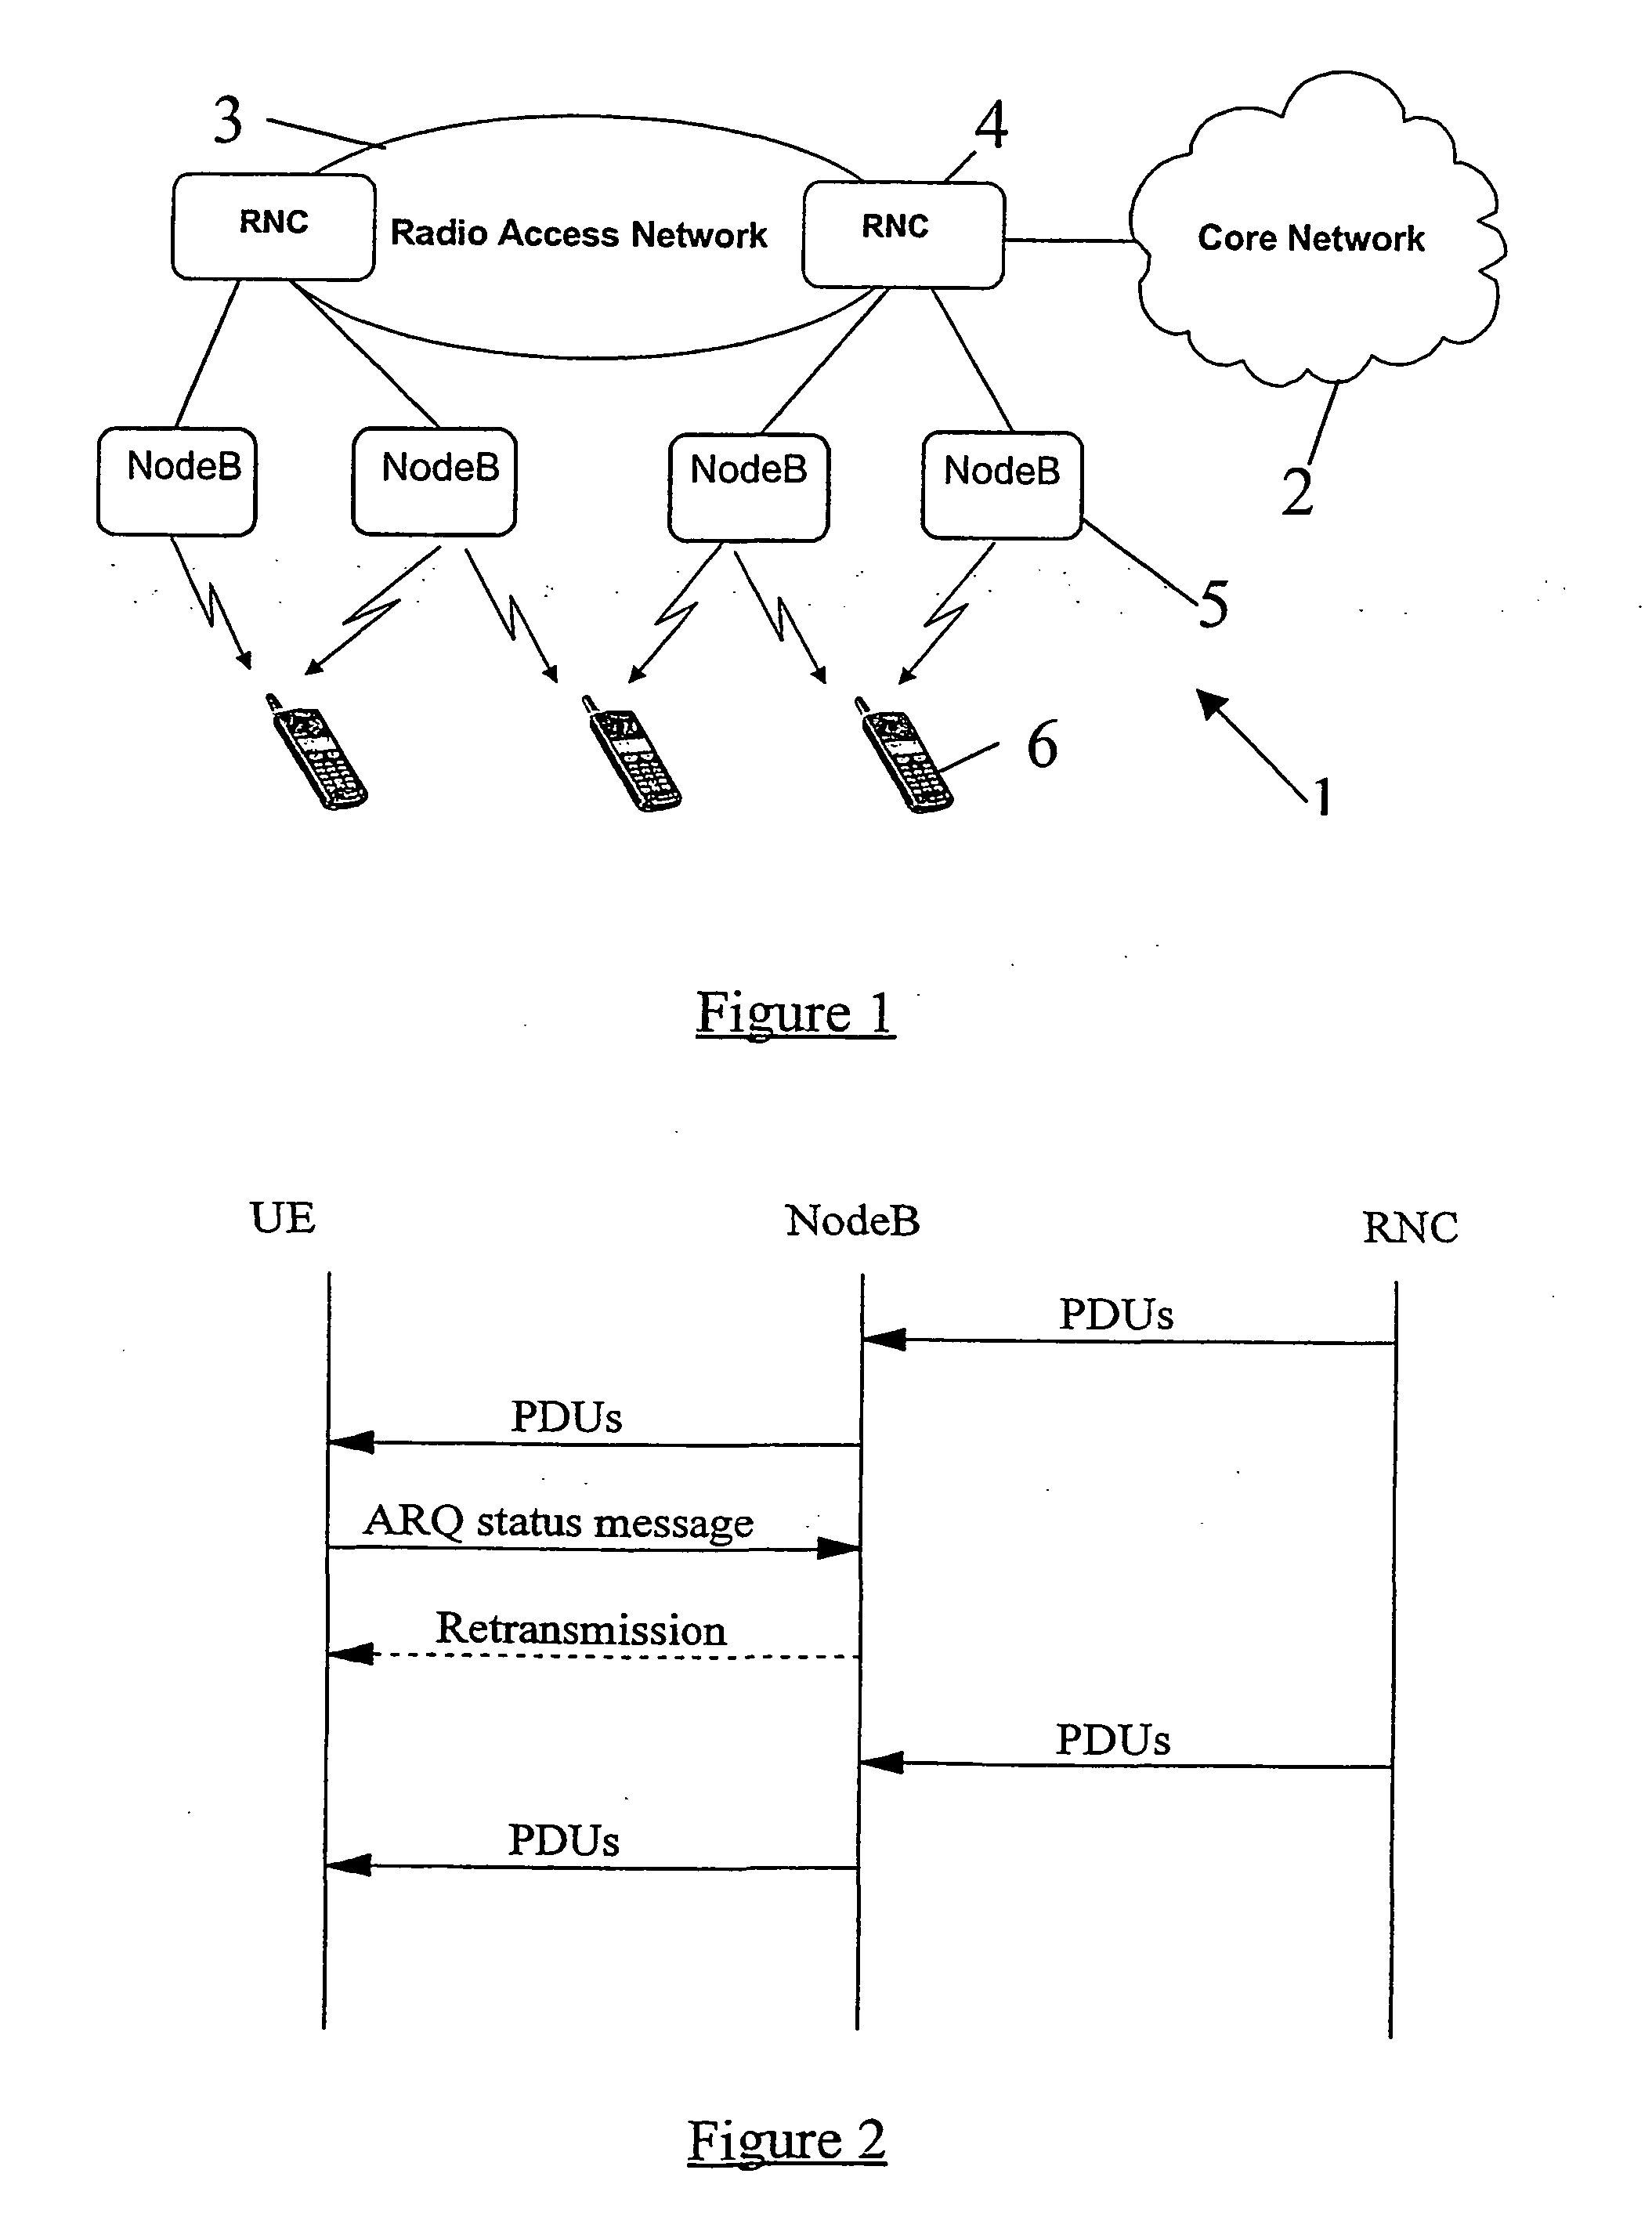 Flow control in a radio access network